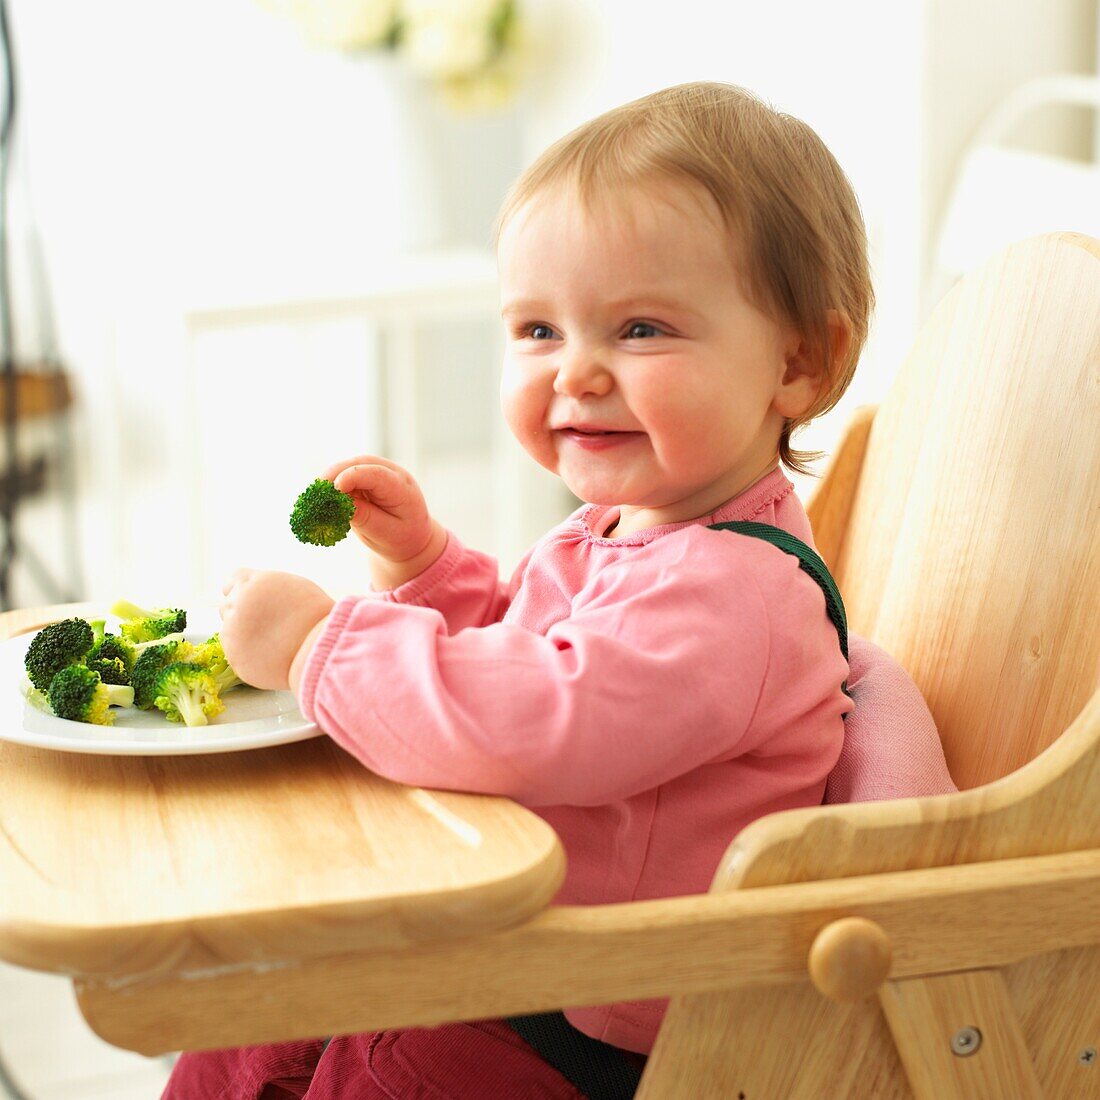 Baby girl sitting in wooden high chair eating broccoli